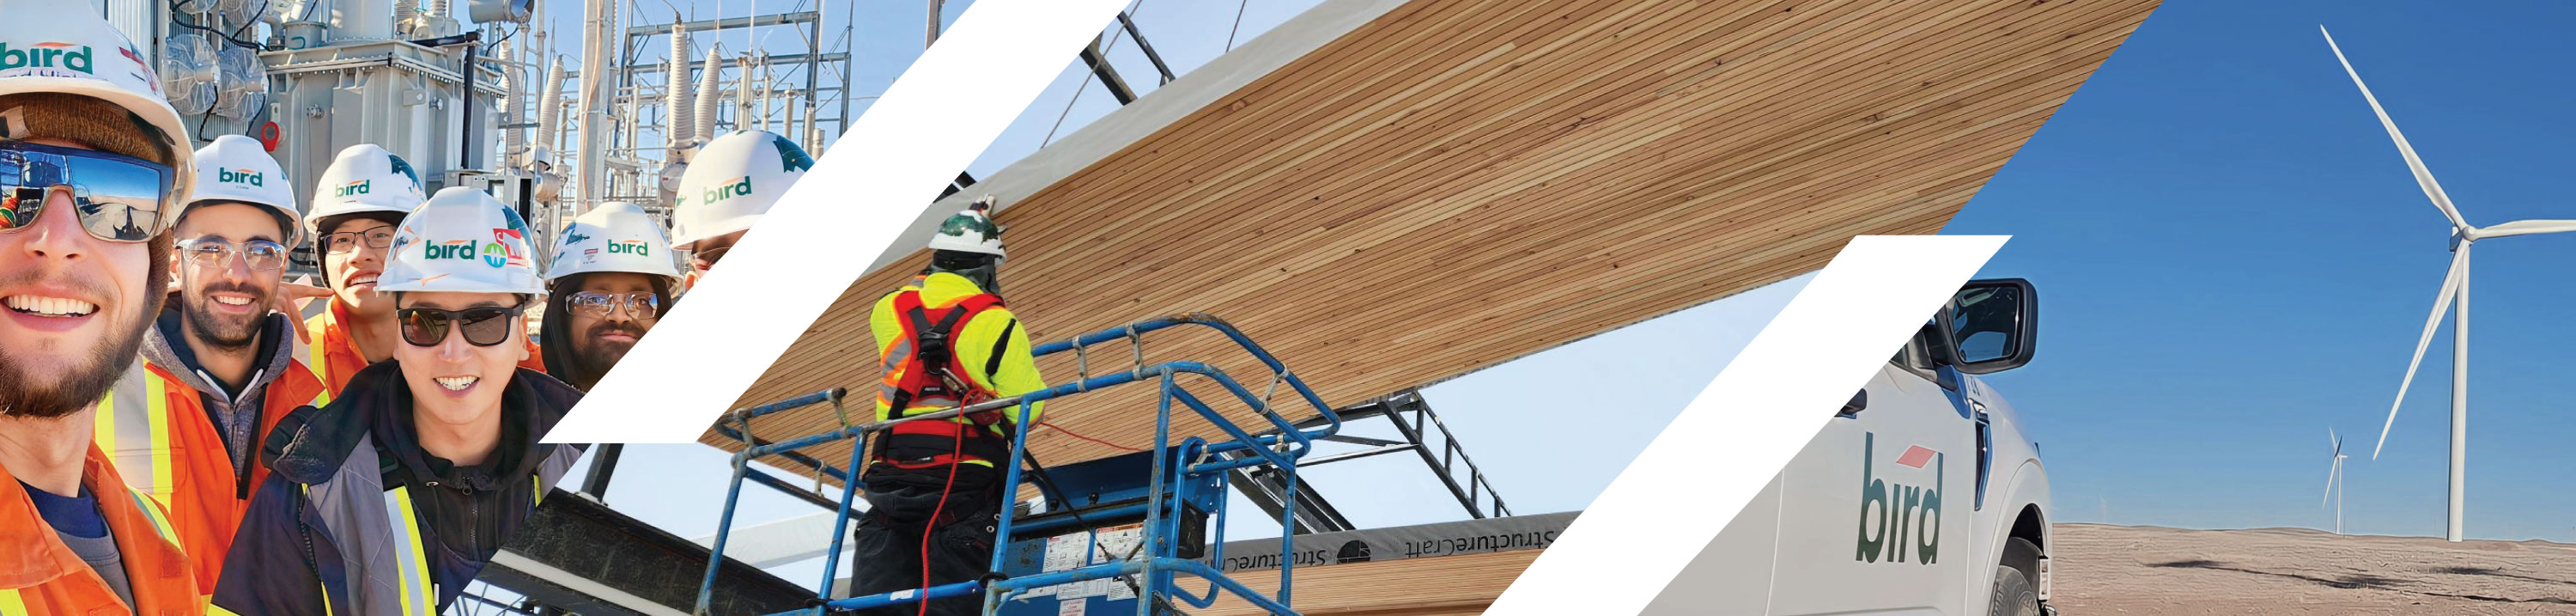 Onsite smiling workers, mass timber install, and wind turbine.